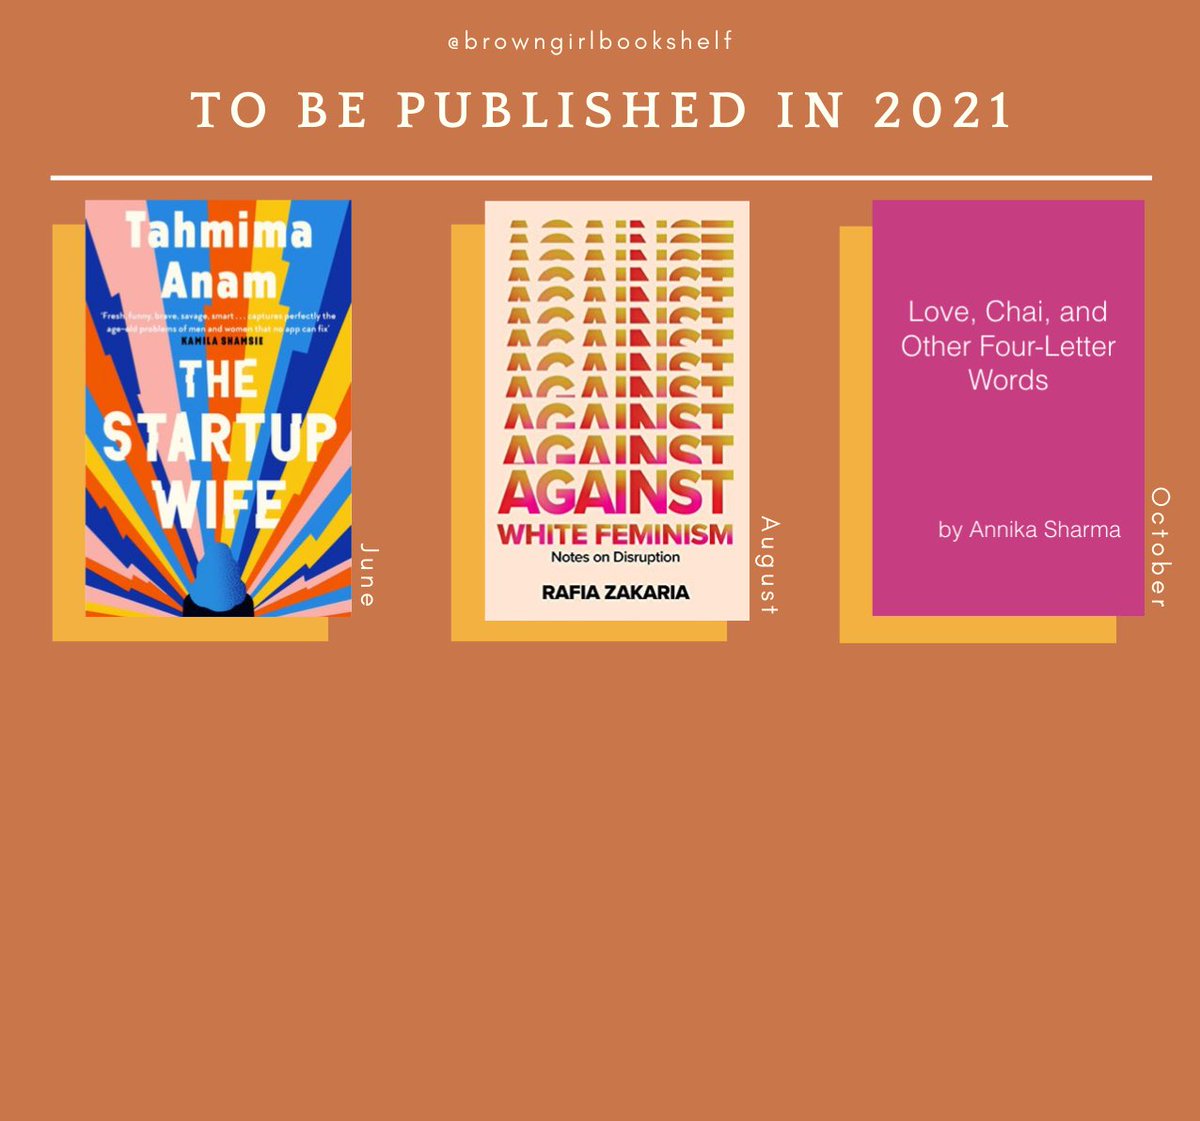 Have you seen our list of 21 books to read in 2021 by South Asian authors? Which one are you picking up for #WorldBookDay? #SouthAsianauthor